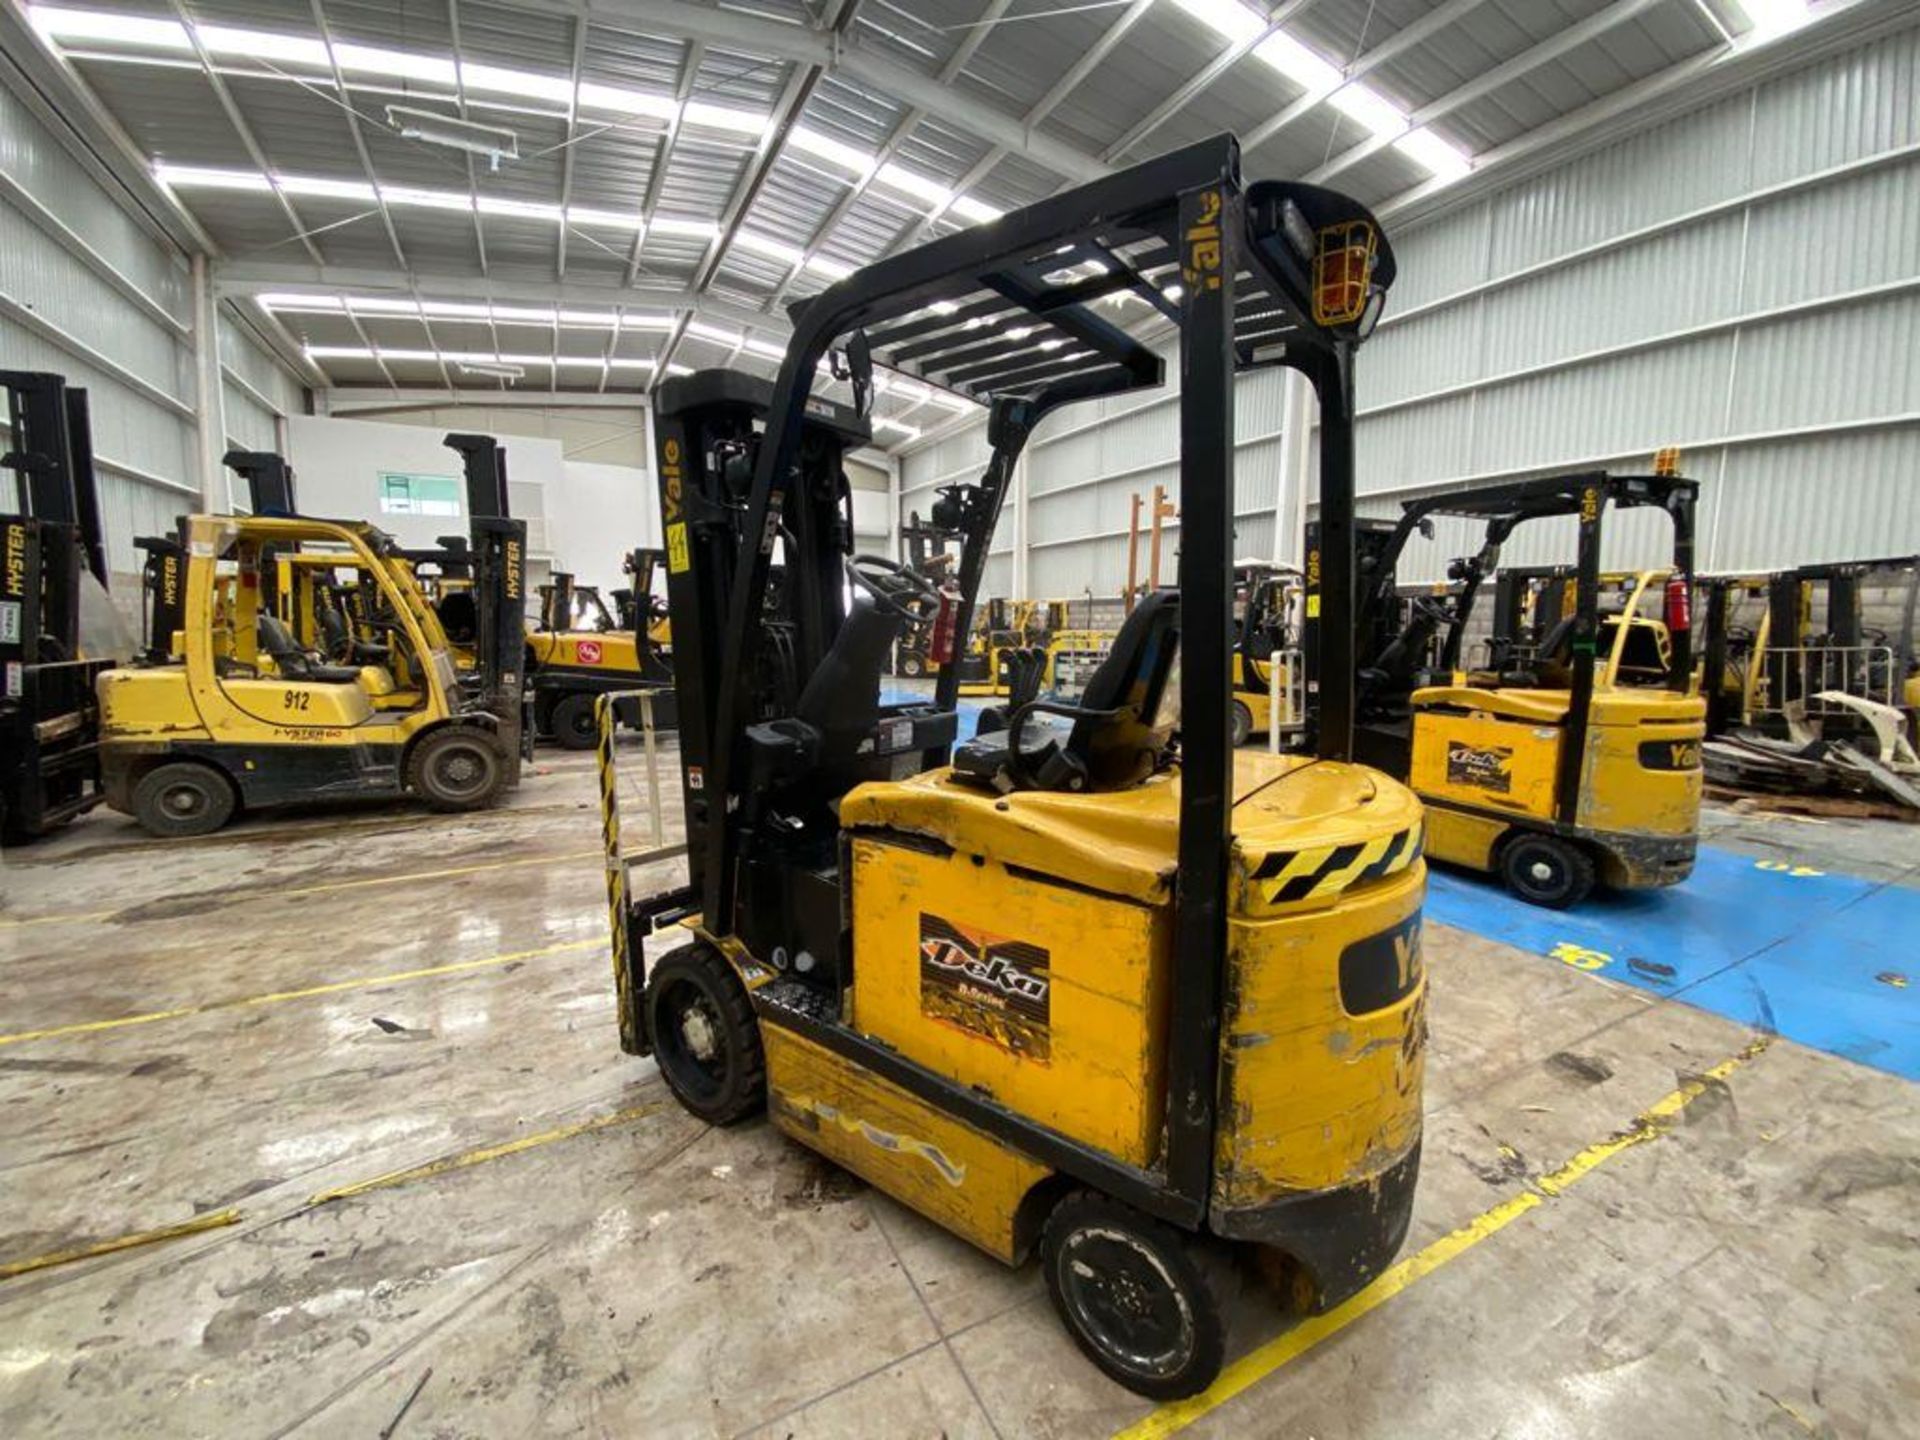 Yale Electric Forklift, Model ERC060VGN36TE088, S/N A968N17882R, Year 2017, 5800 lb capacity - Image 15 of 44